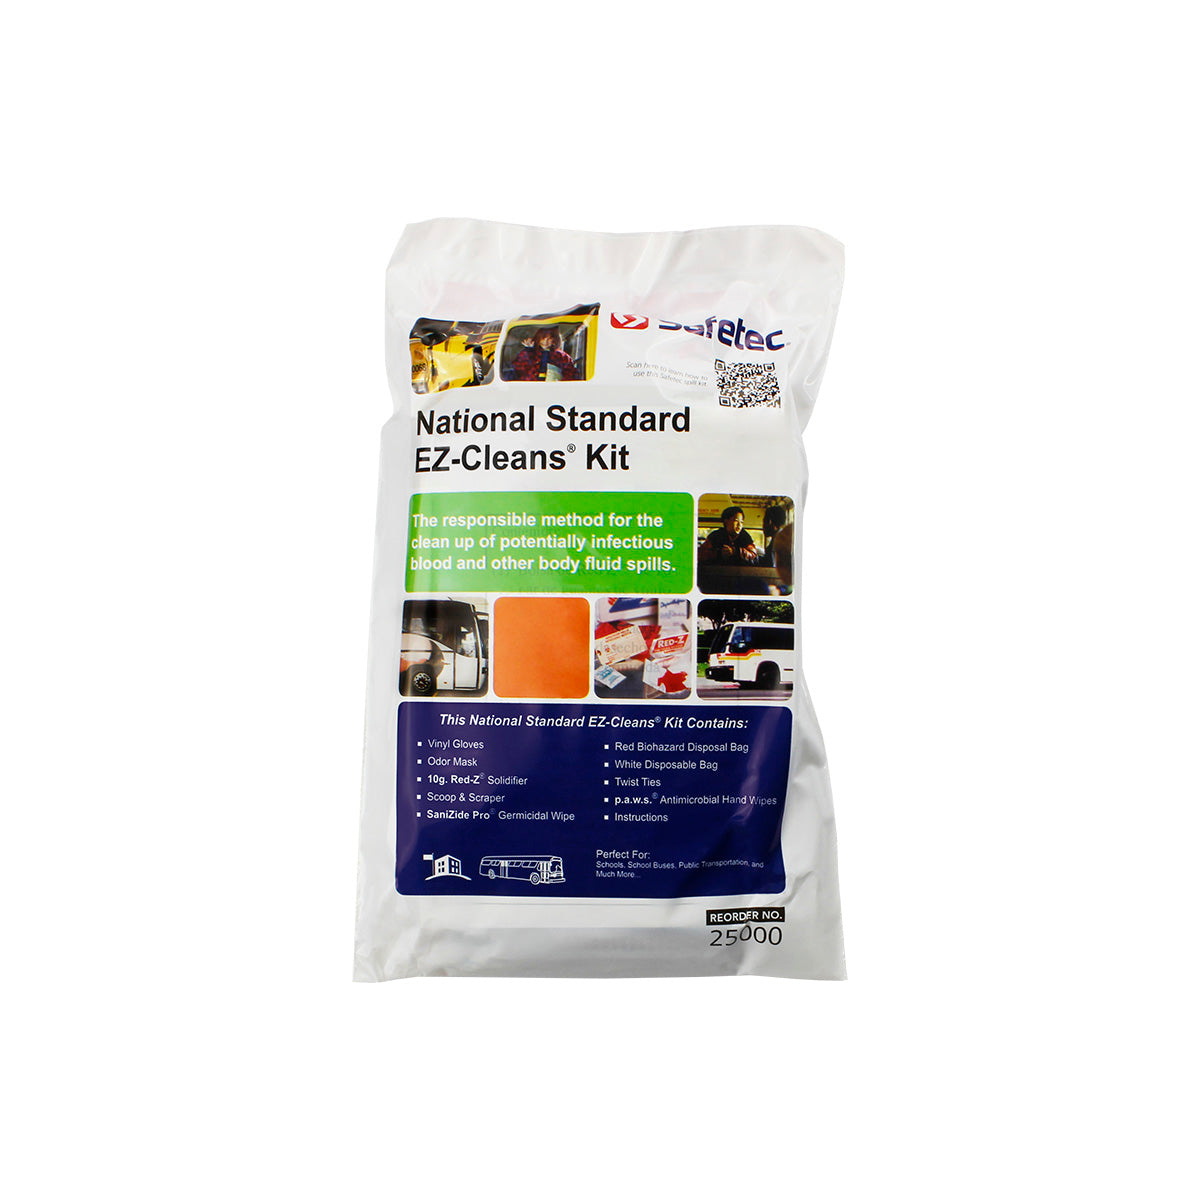 National Standard EZ-Cleans® Kit - Infection Control